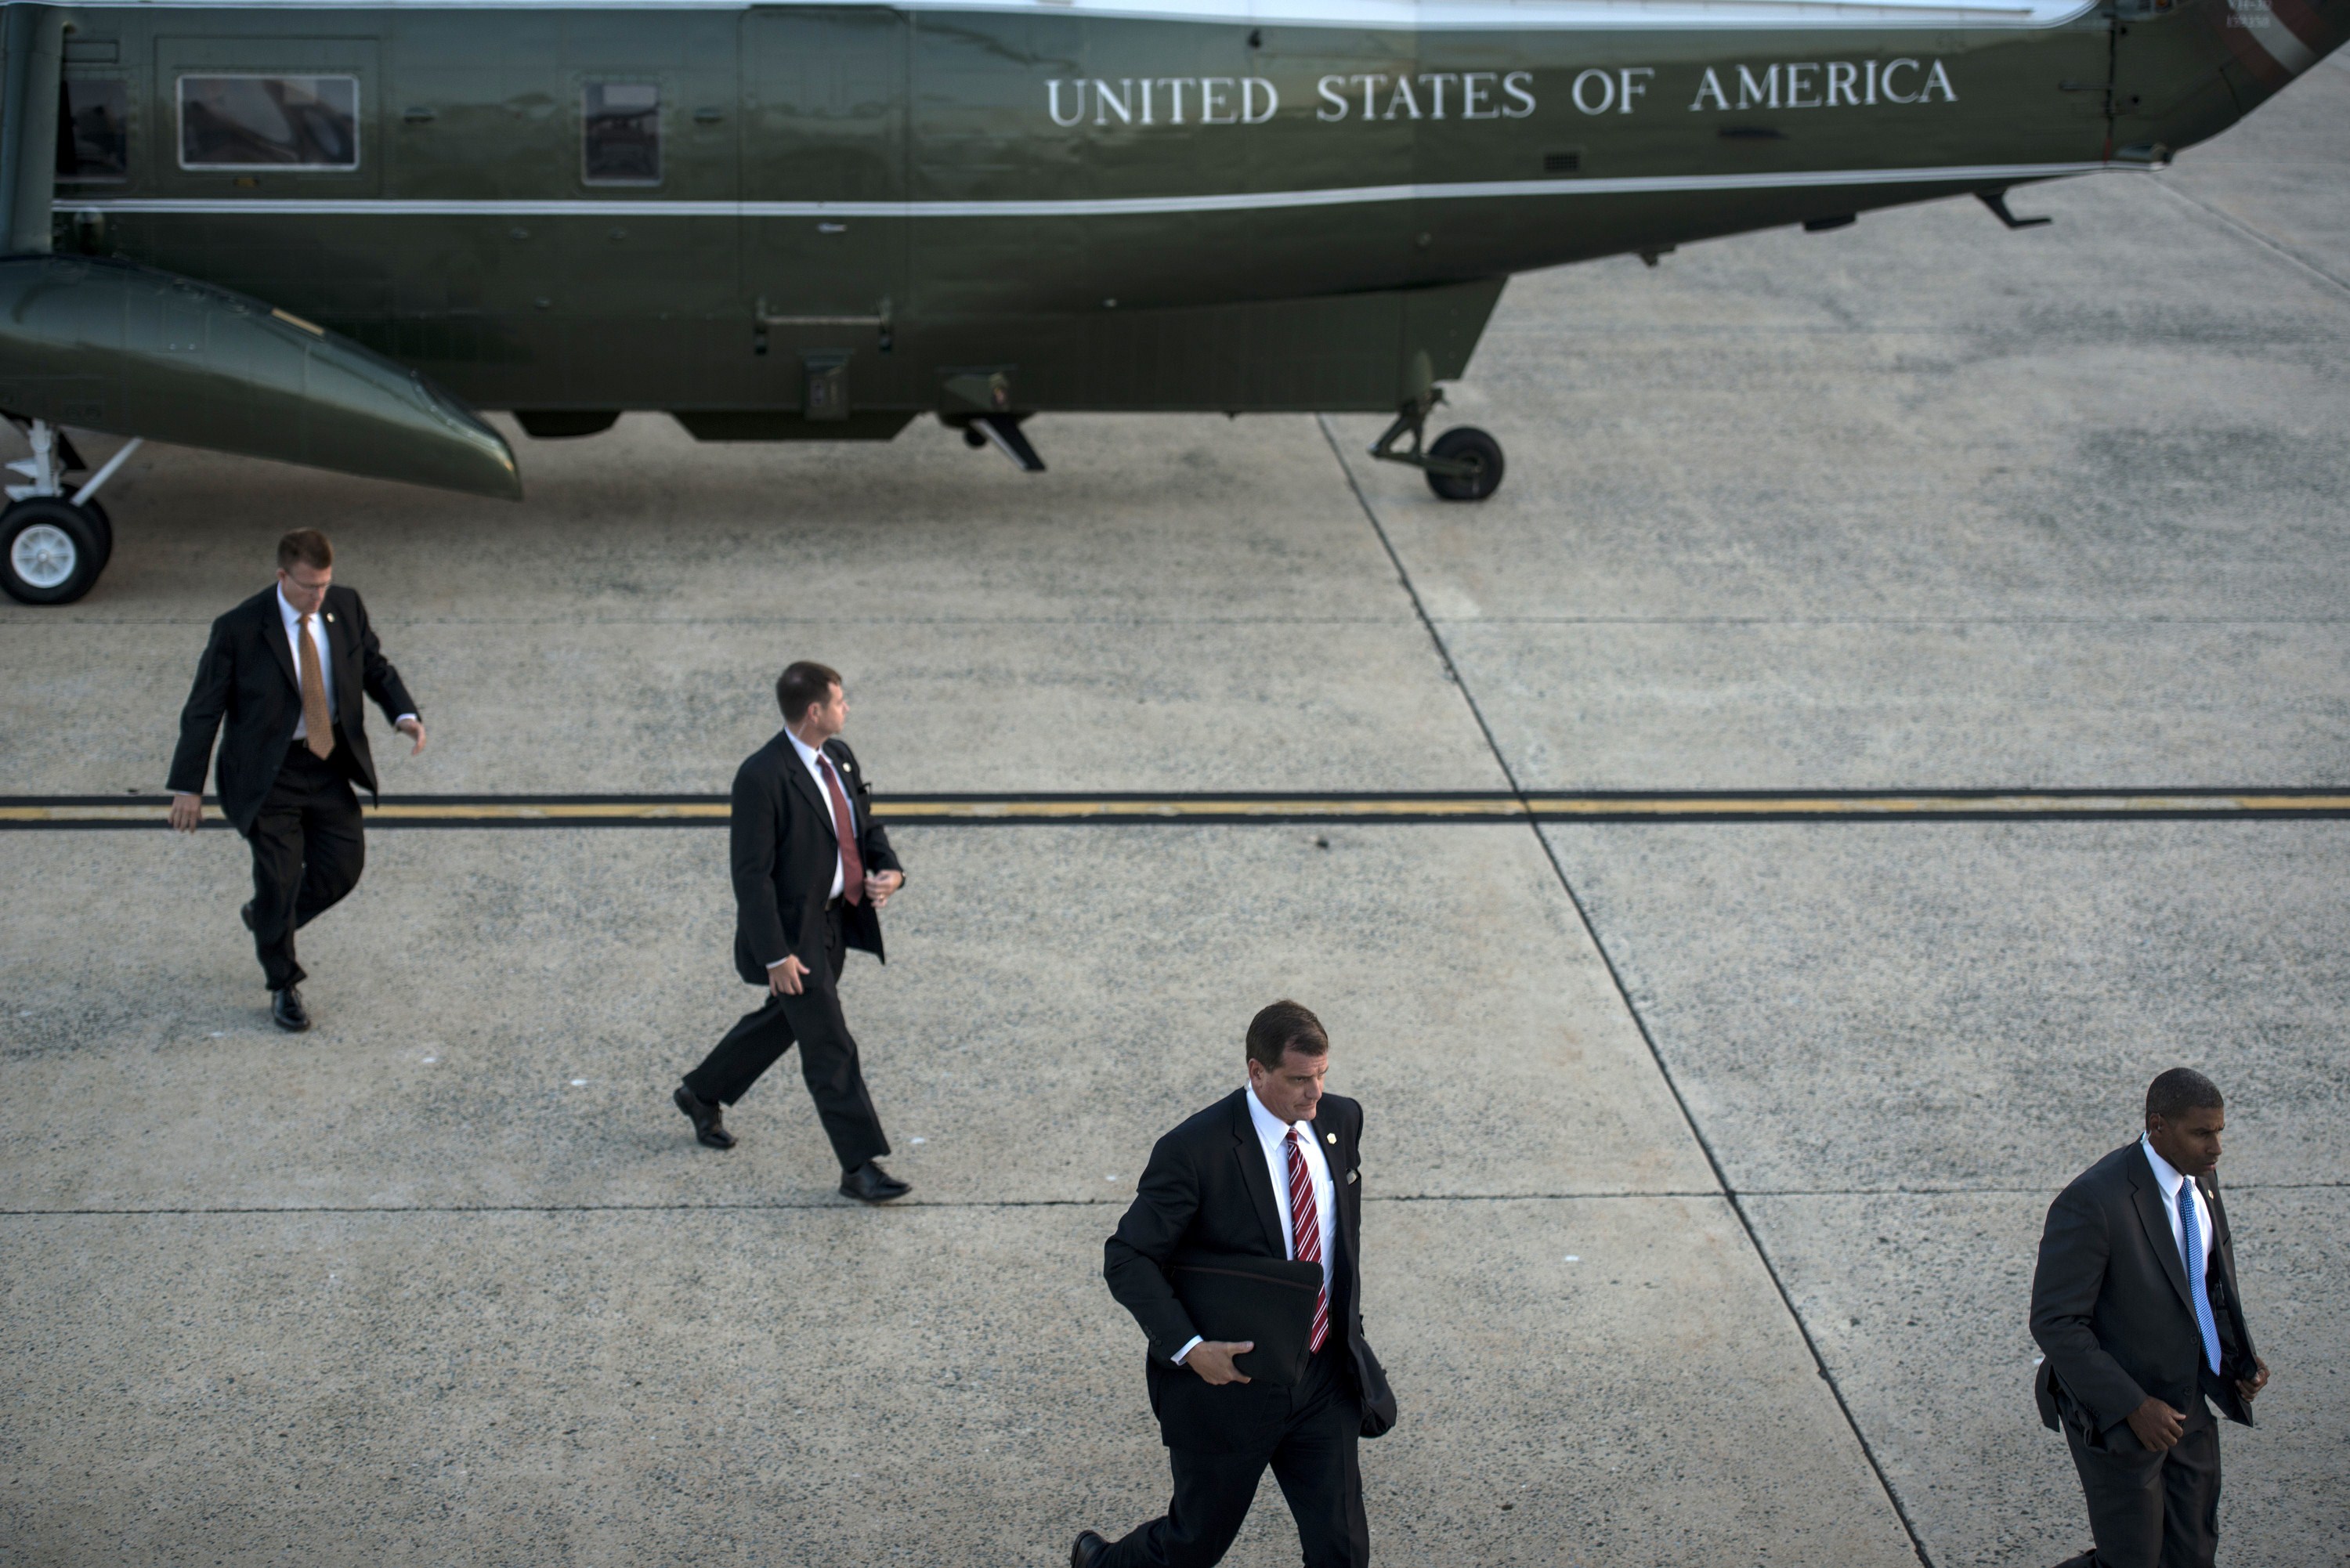 Members of the US Secret Service arrive to escort President Barack Obama on a trip at Andrews Air Force Base on Oct. 1, 2014 in Maryland. (Brendan Smilowski—AFP/Getty Images)